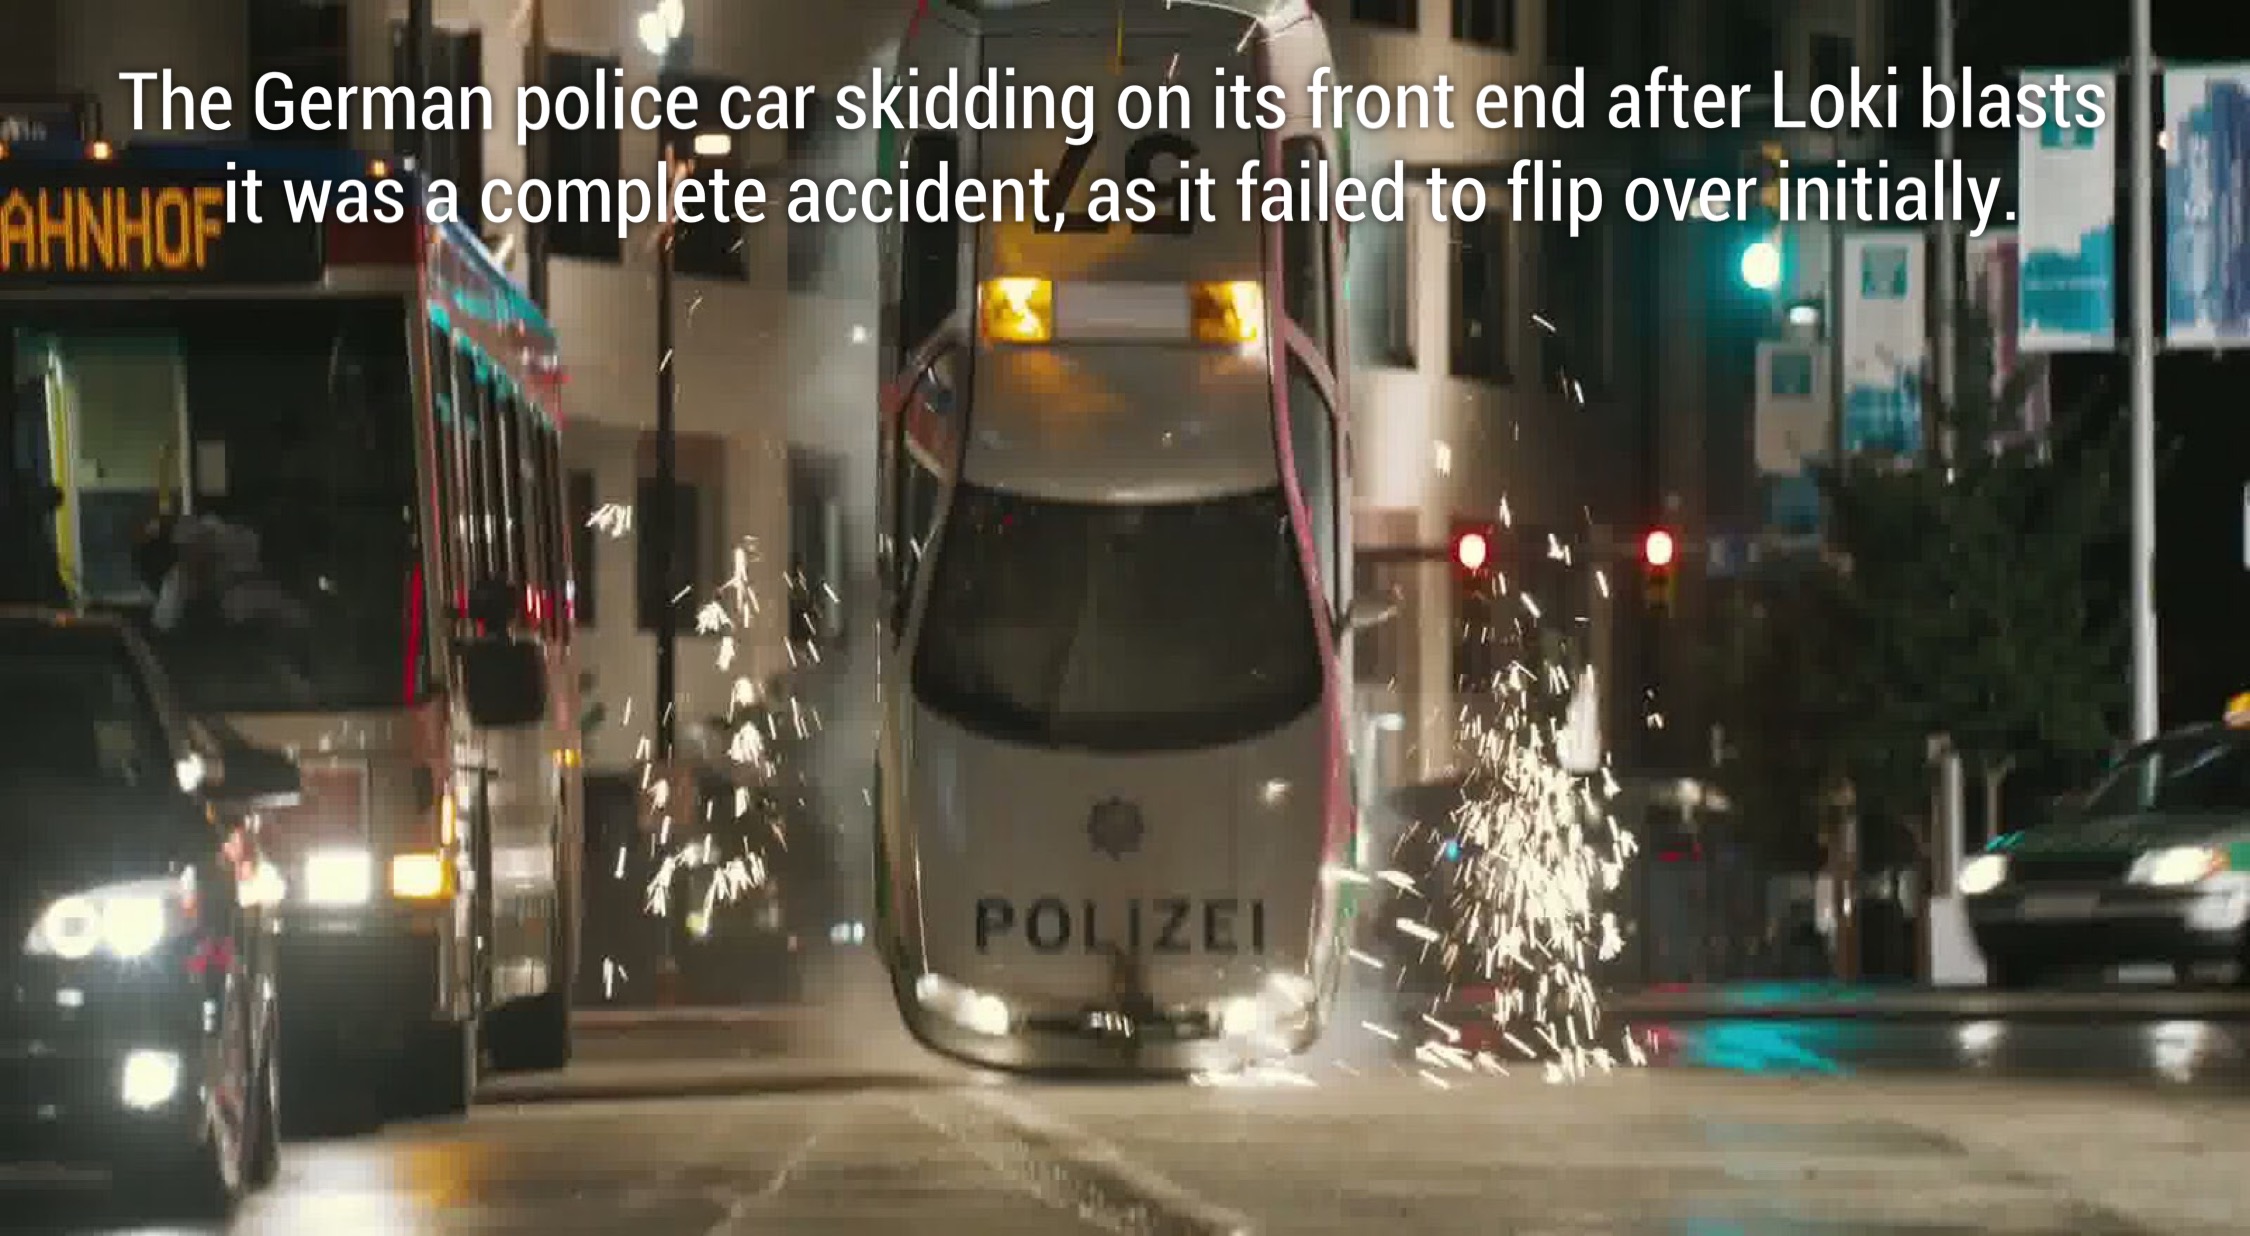 avengers polizei - The German police car skidding on its front end after Loki blasts Muncit was a complete accident, as it failed to flip over initially. Polizei